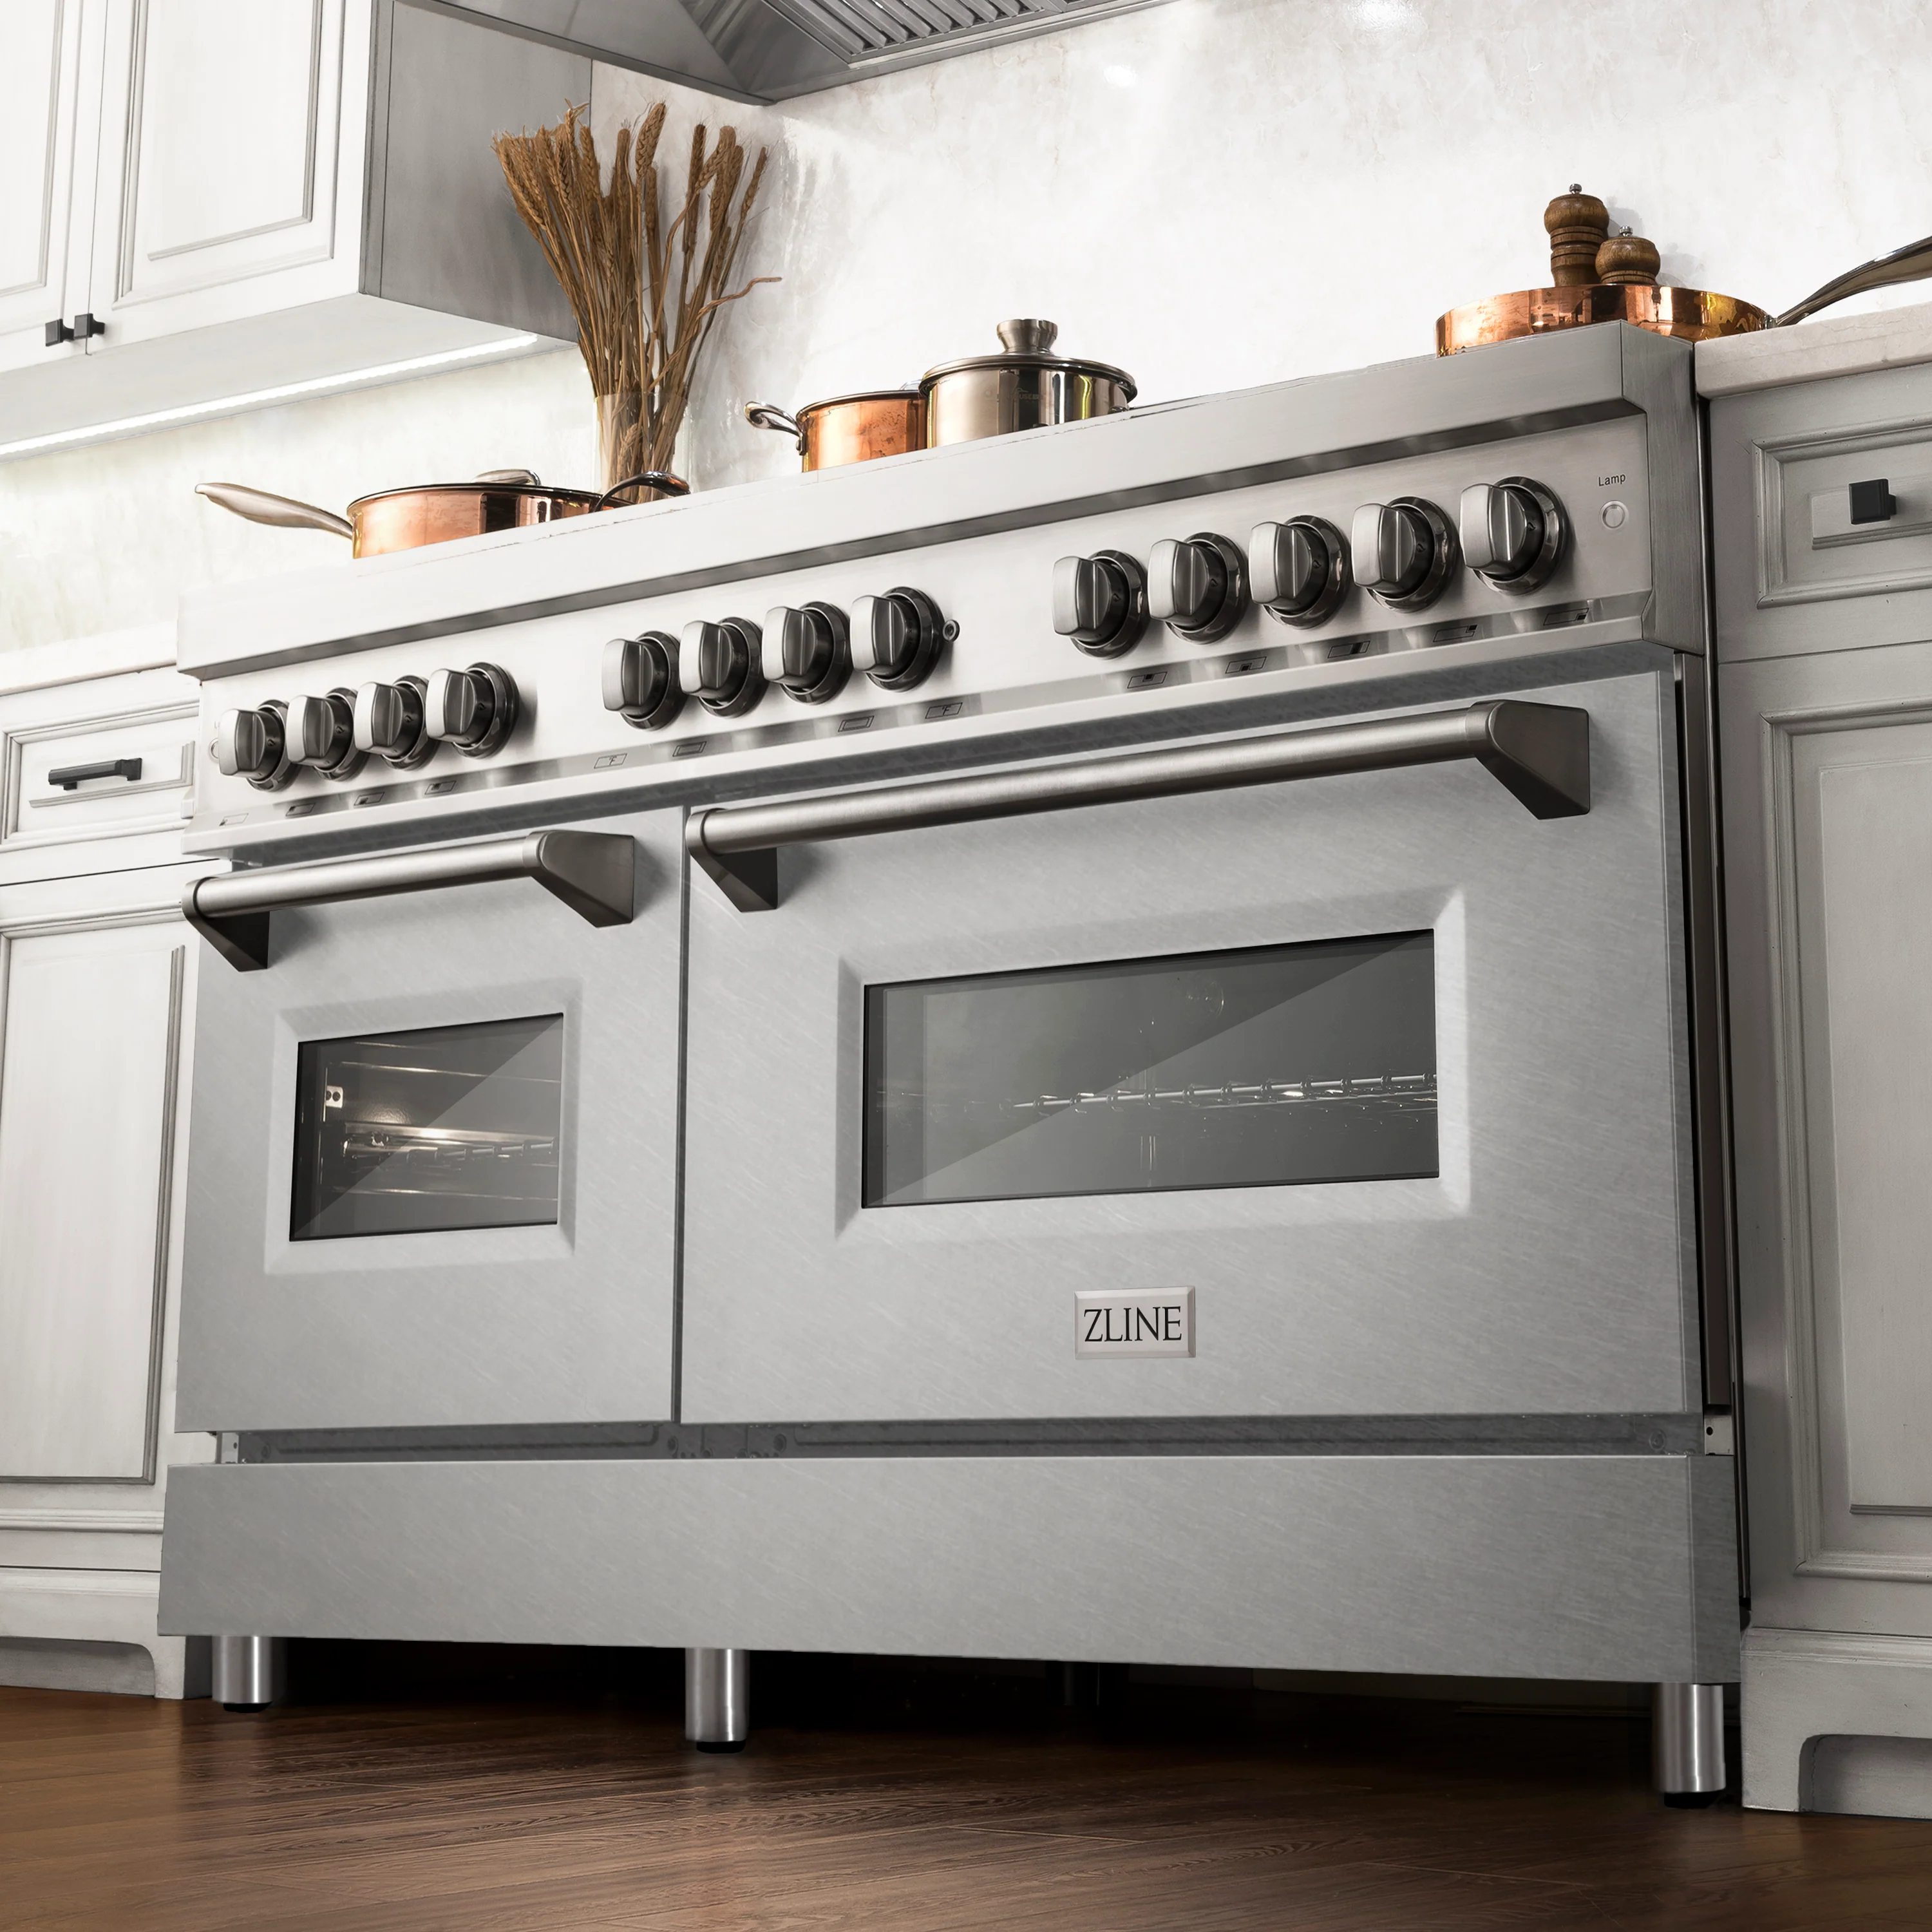 ZLINE 60" 7.4 cu. ft. Dual Fuel Range with Gas Stove and Electric Oven in Fingerprint Resistant Stainless Steel (RA-SN-60)